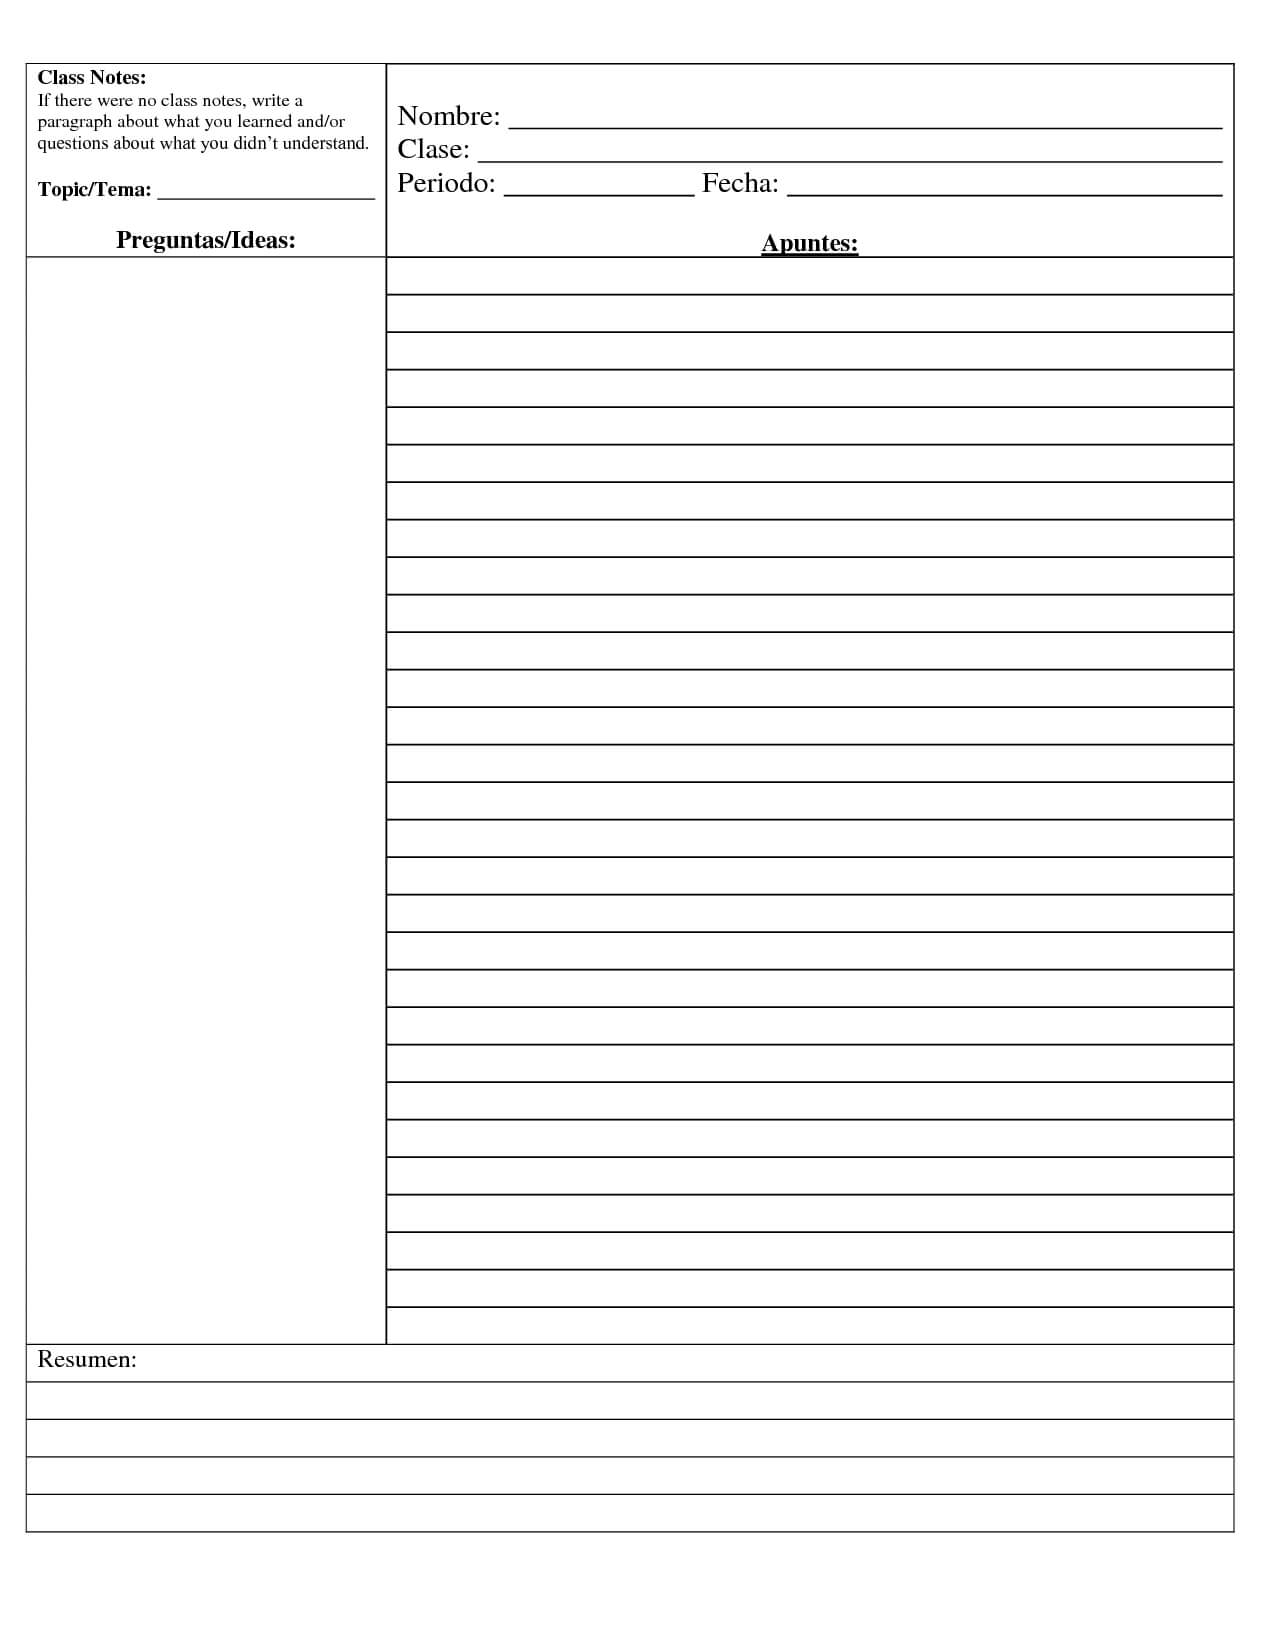 Doc 585734 Cornell Note Template Cornell Notes Best Cornell With Avid Cornell Note Template